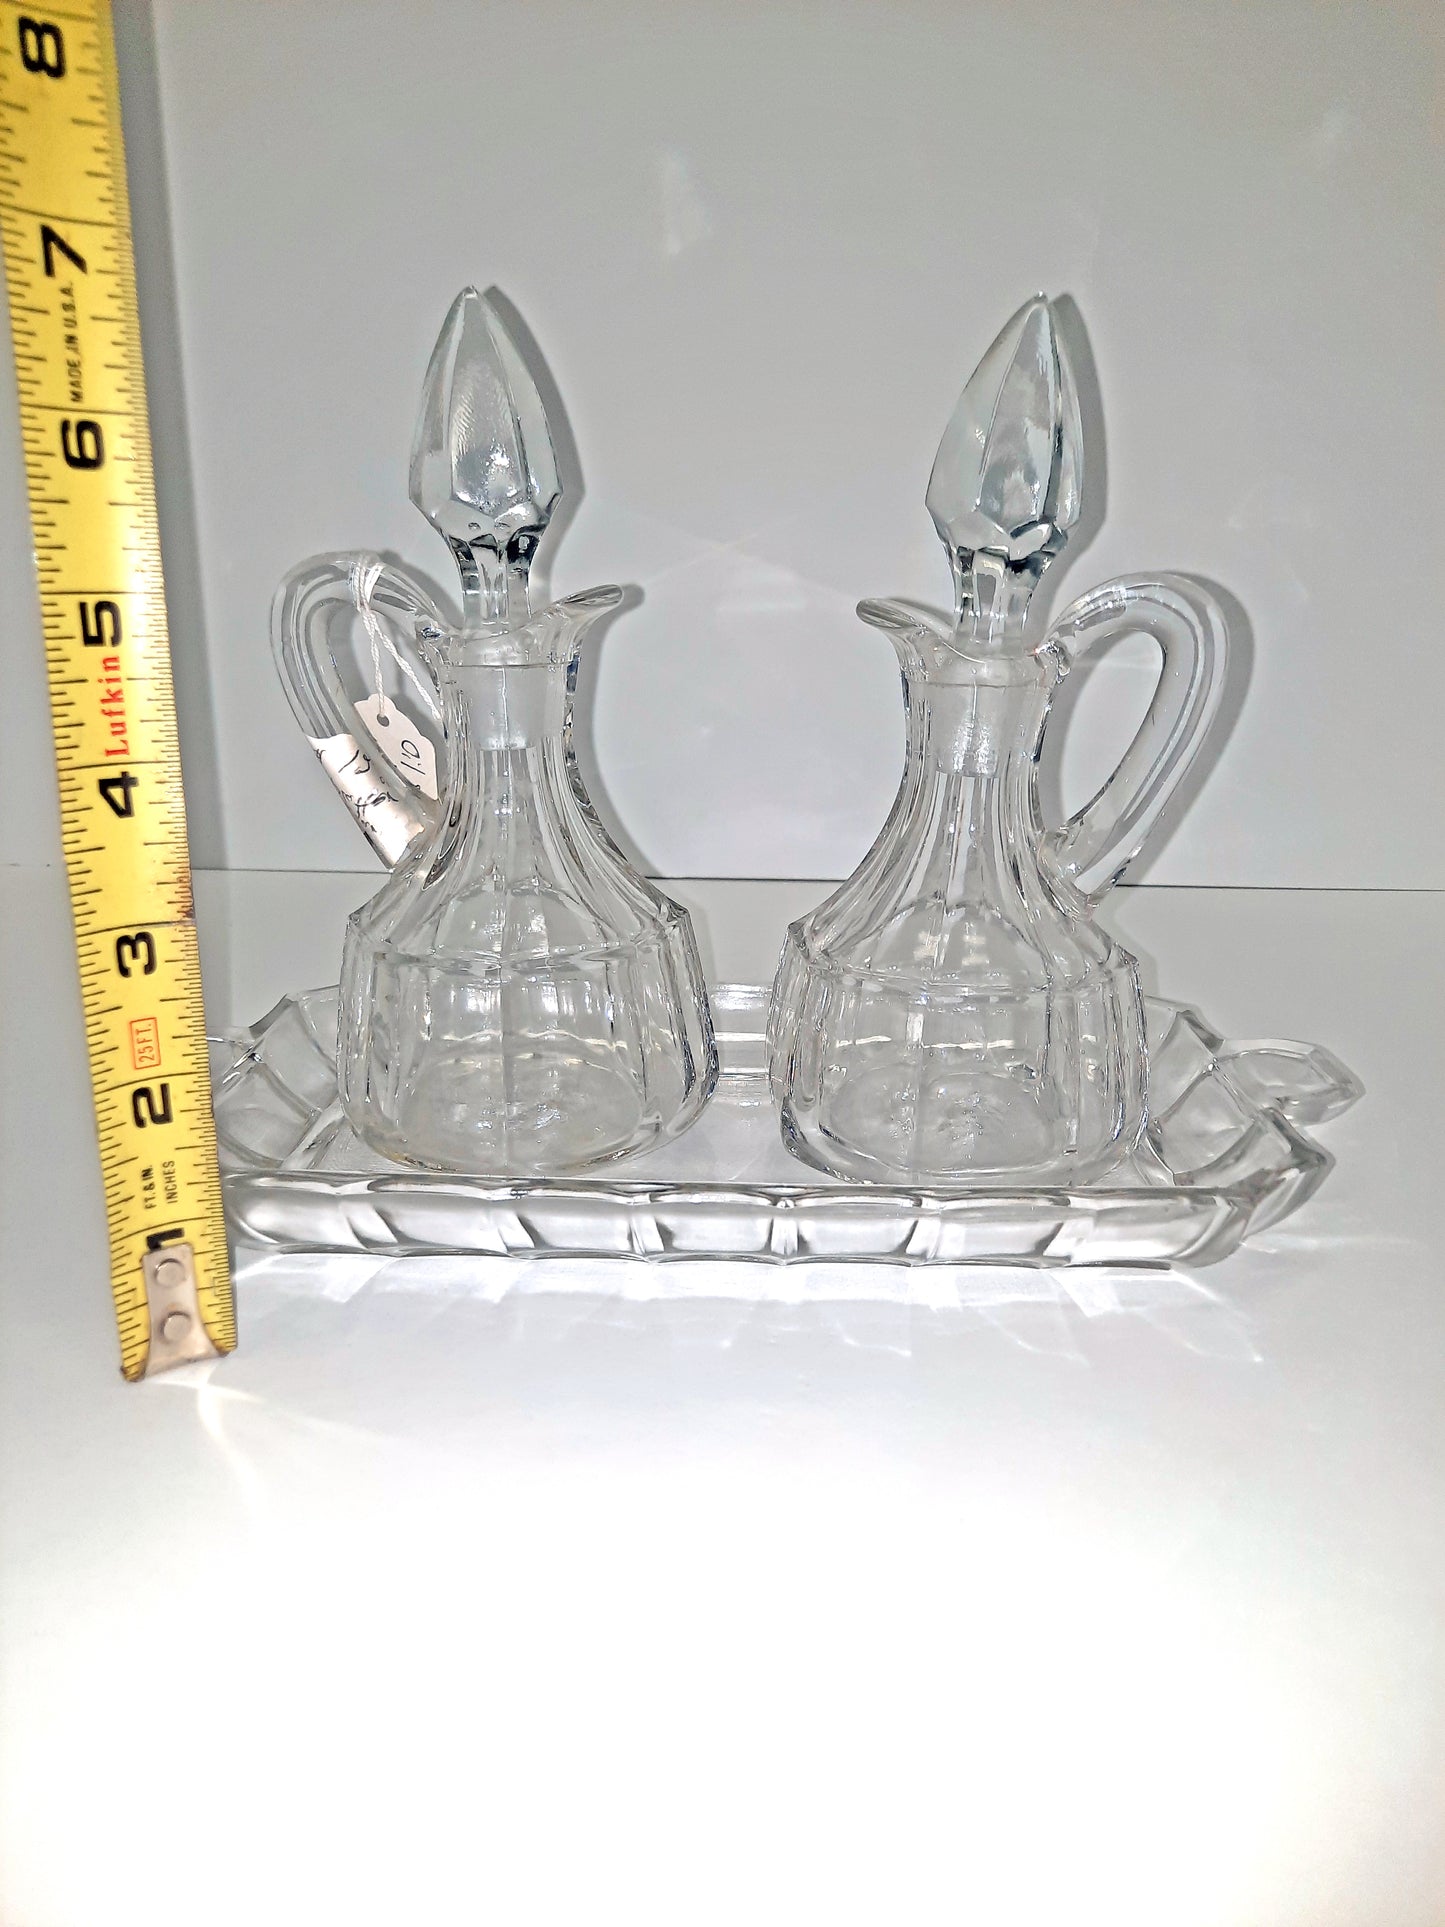 Glass 'Oil & Vinegar' Decanters with Platter